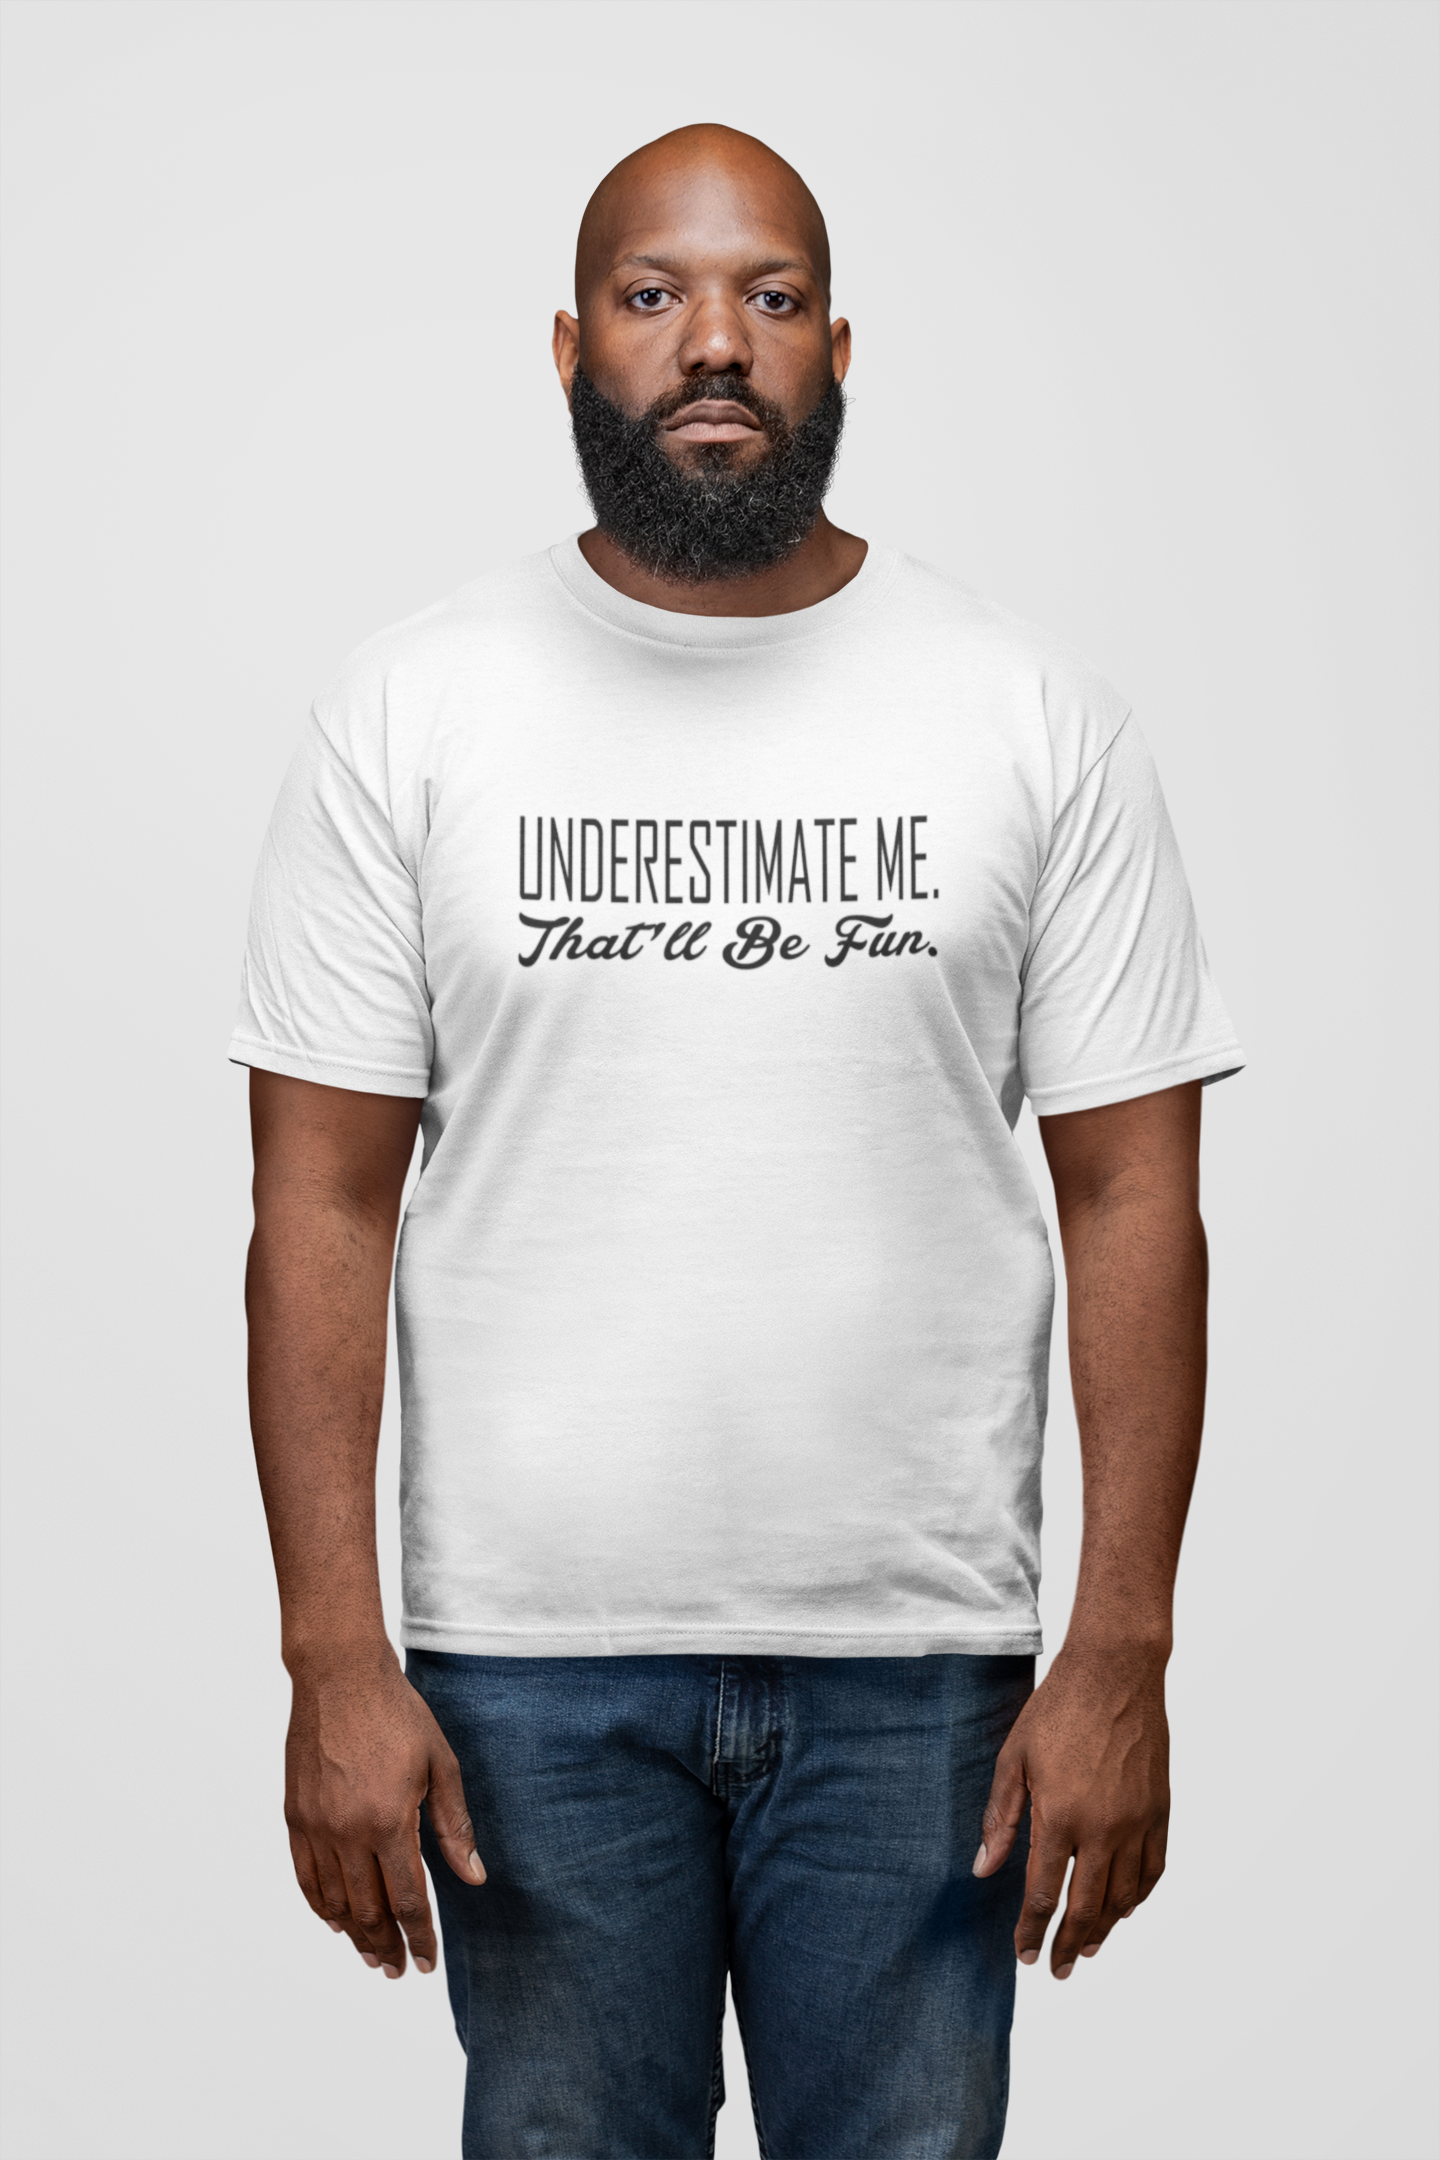 t-shirt-mockup-of-a-man-with-a-beard-in-a-photo-studio-21516